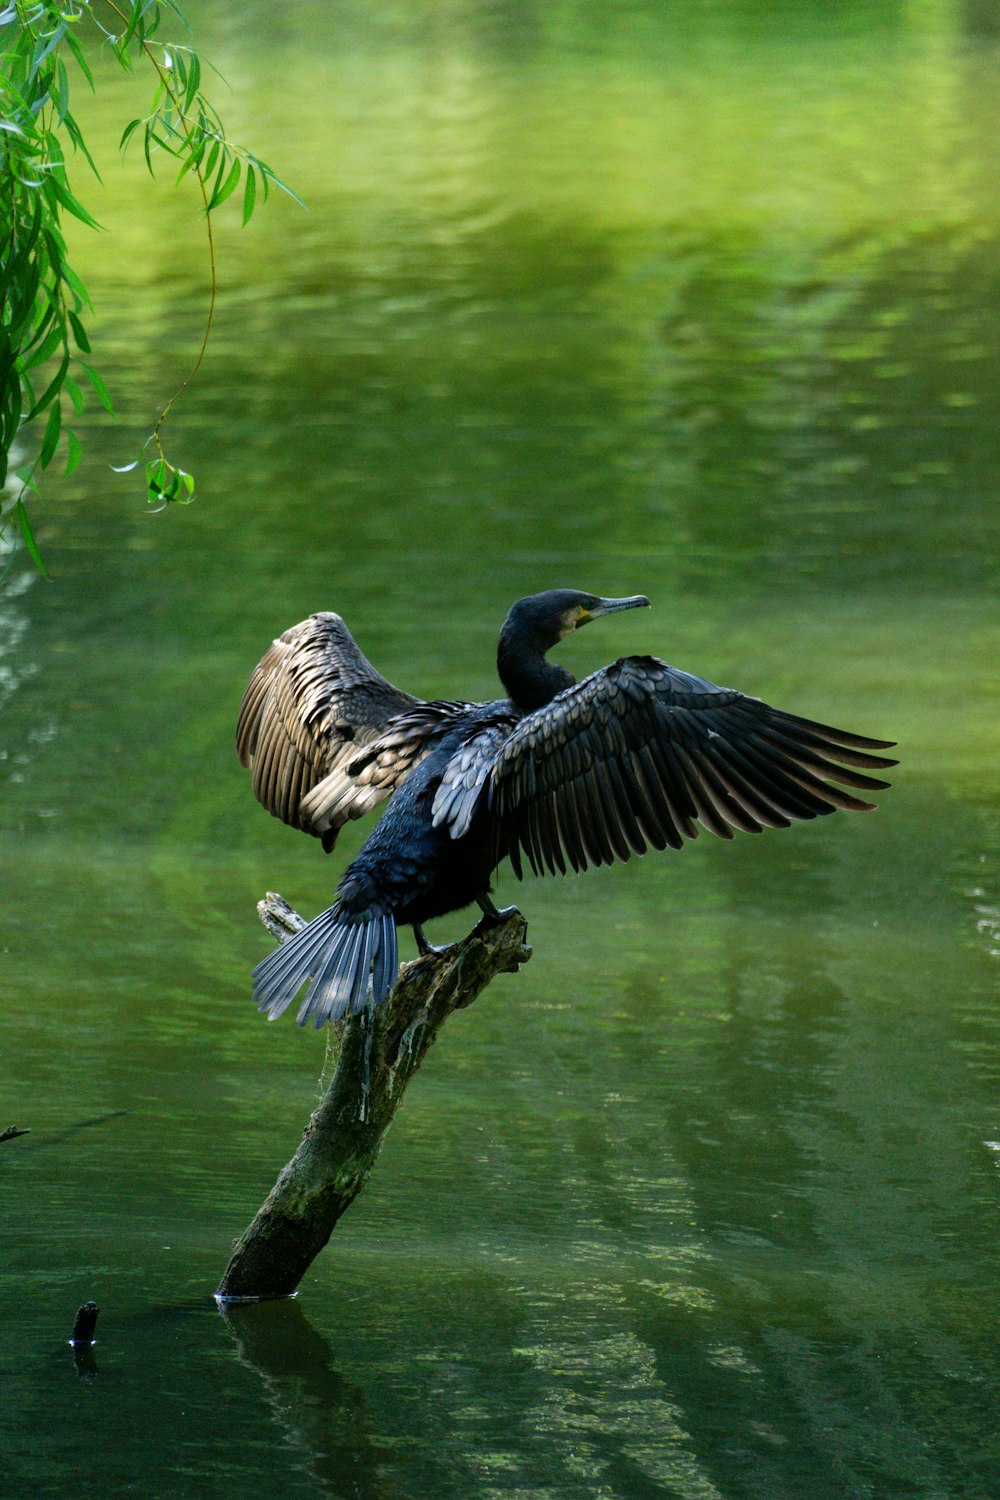 a bird is sitting on a branch in the water